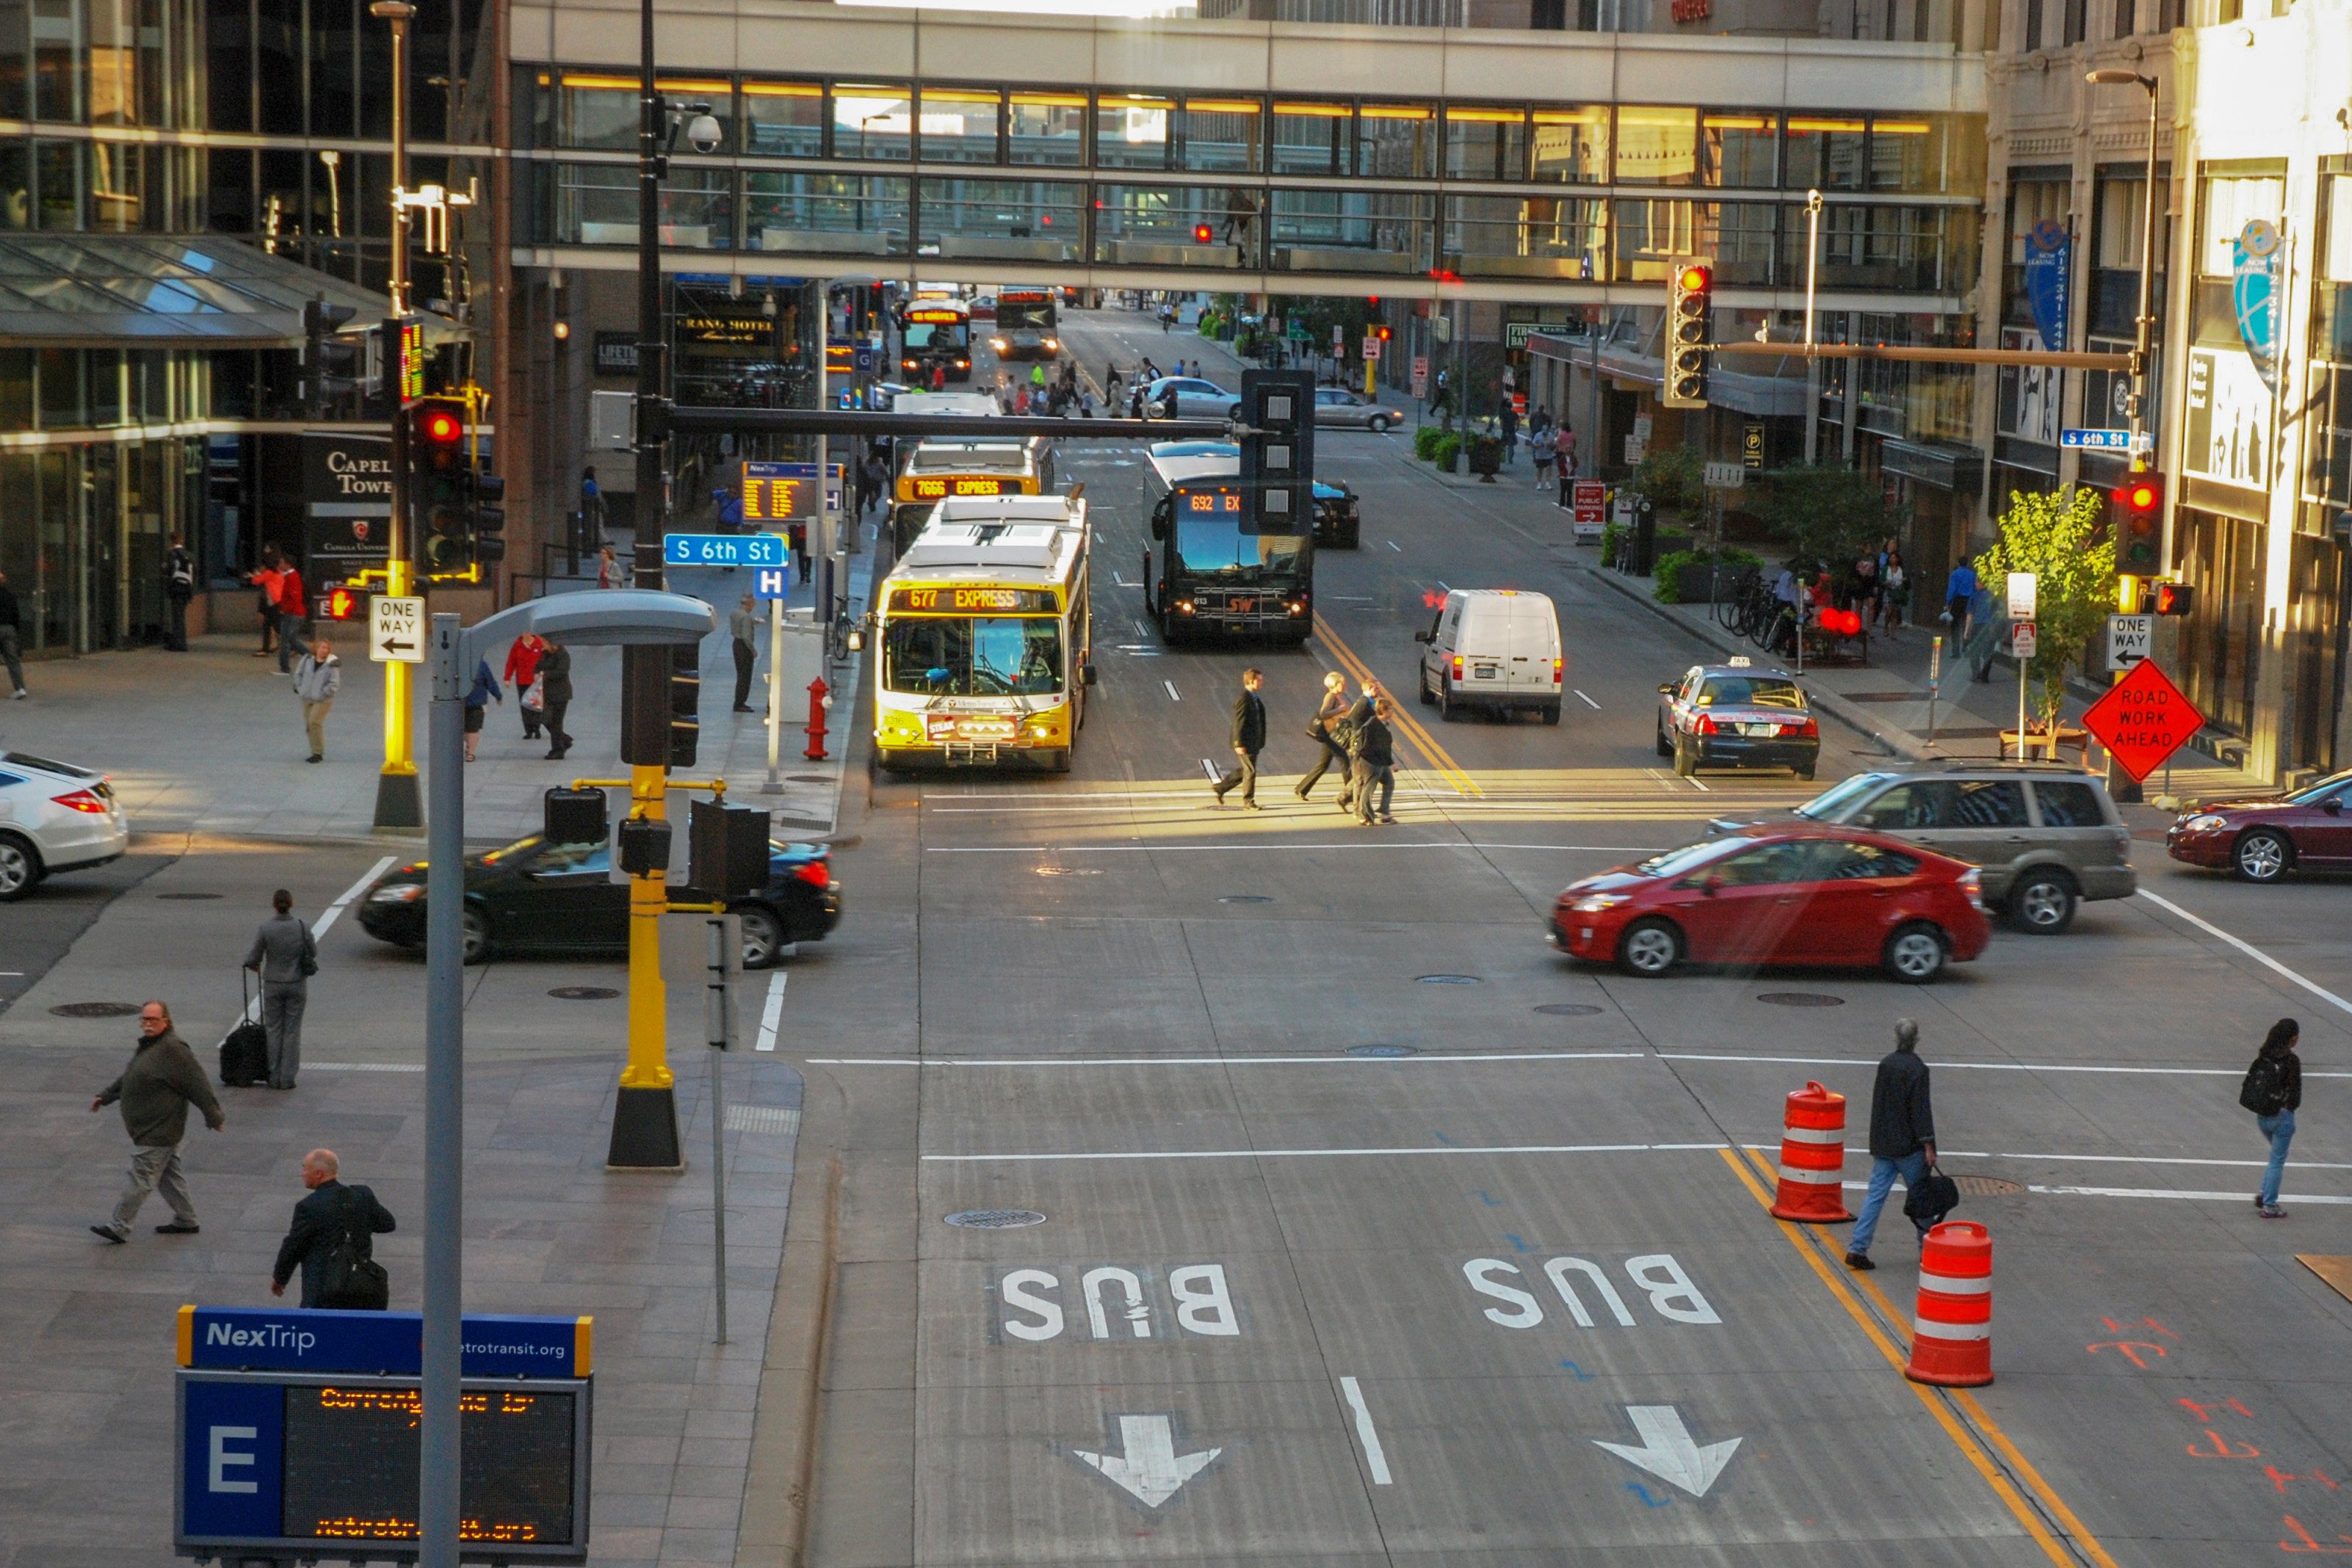 Buses on the Marq2 corridor in downtown Minneapolis.